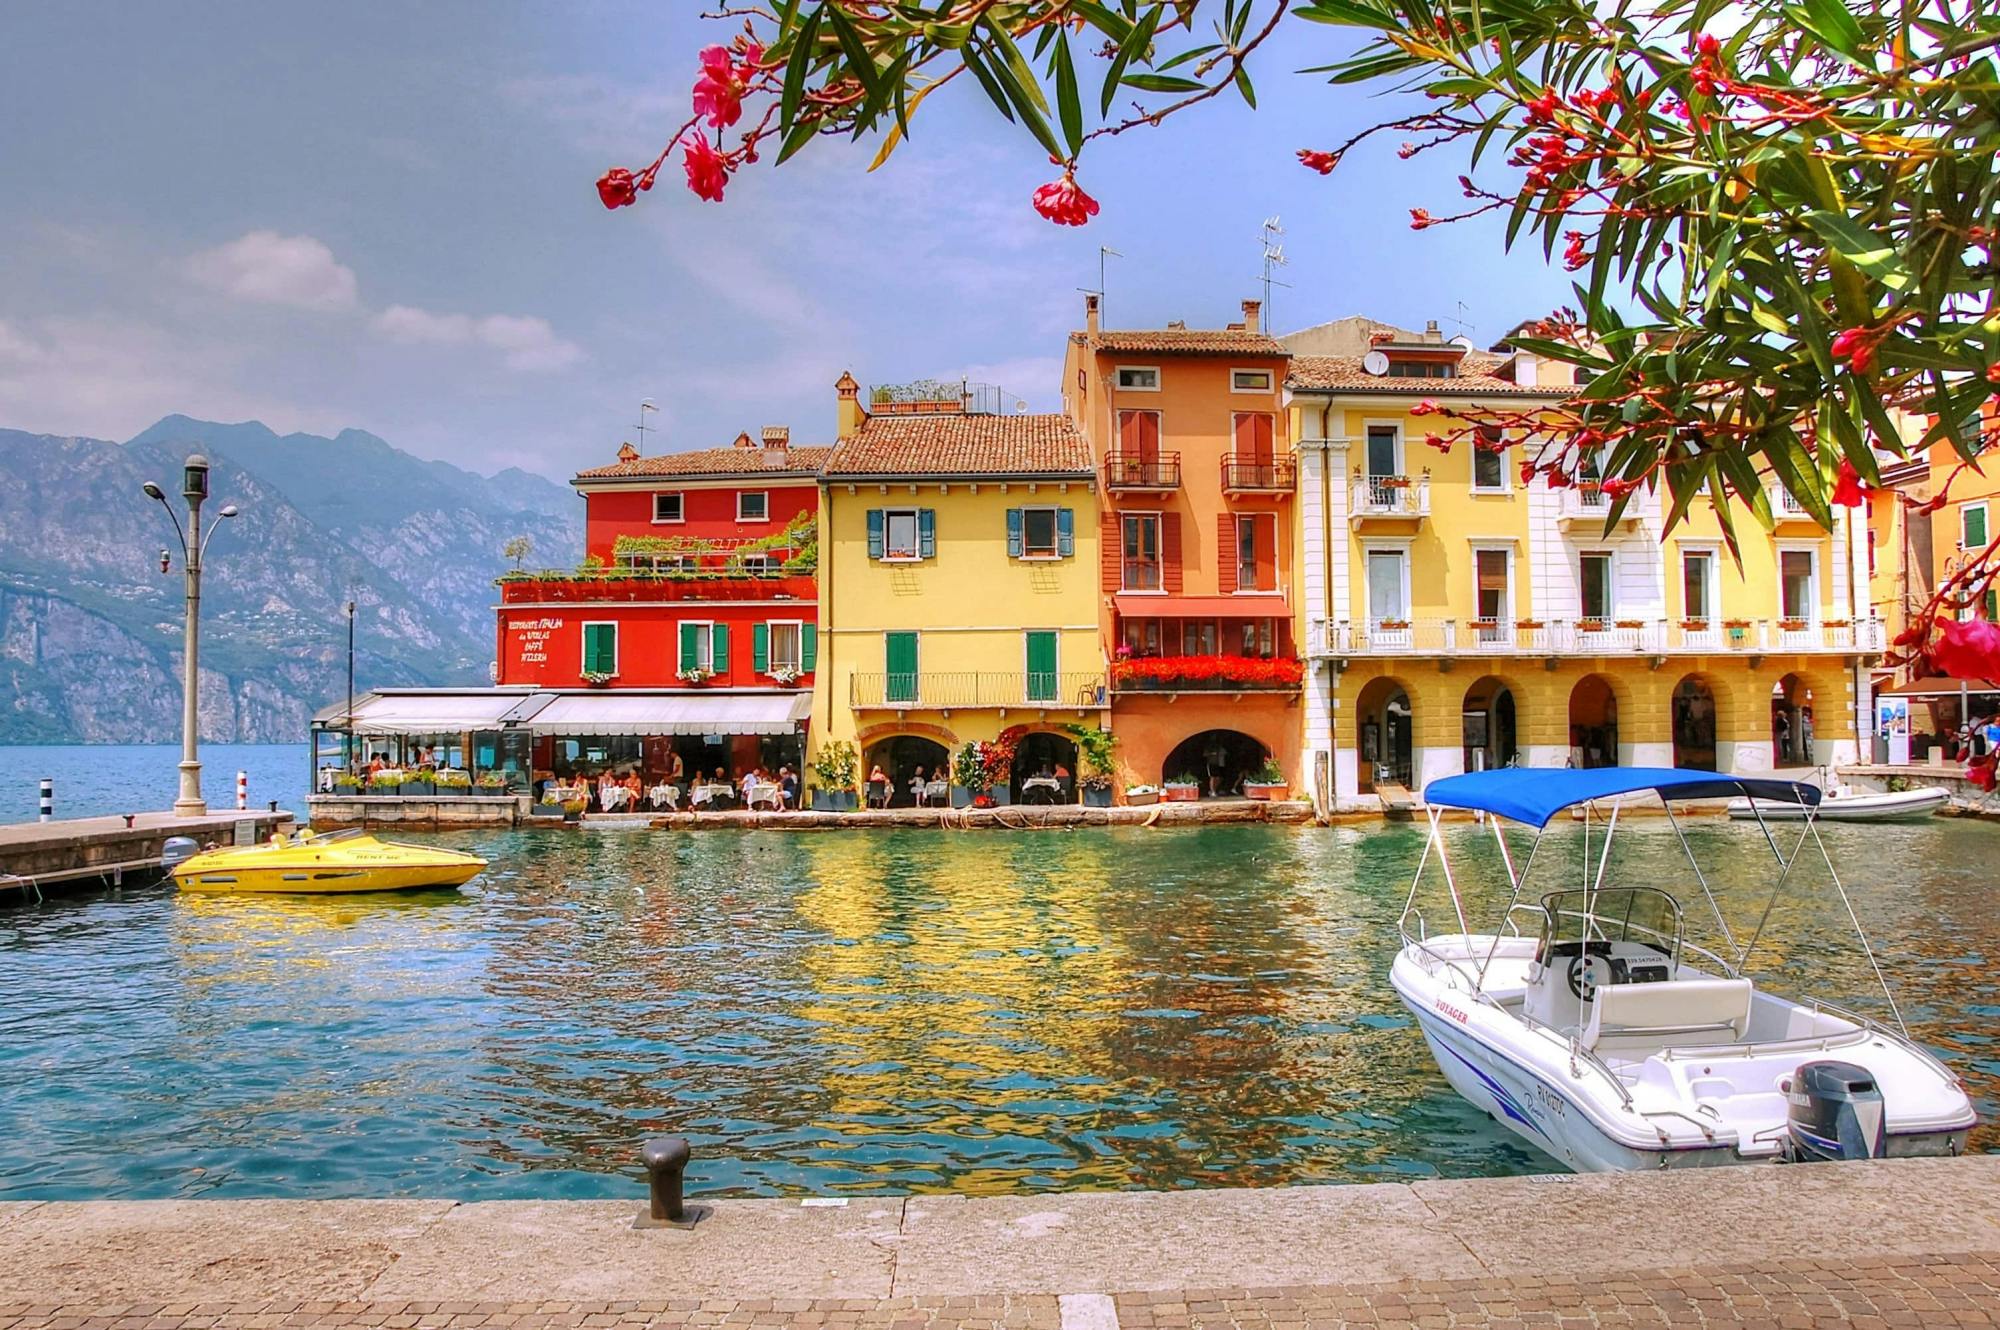 Gems of Lake Garda - Tour of the North with Boat Trip